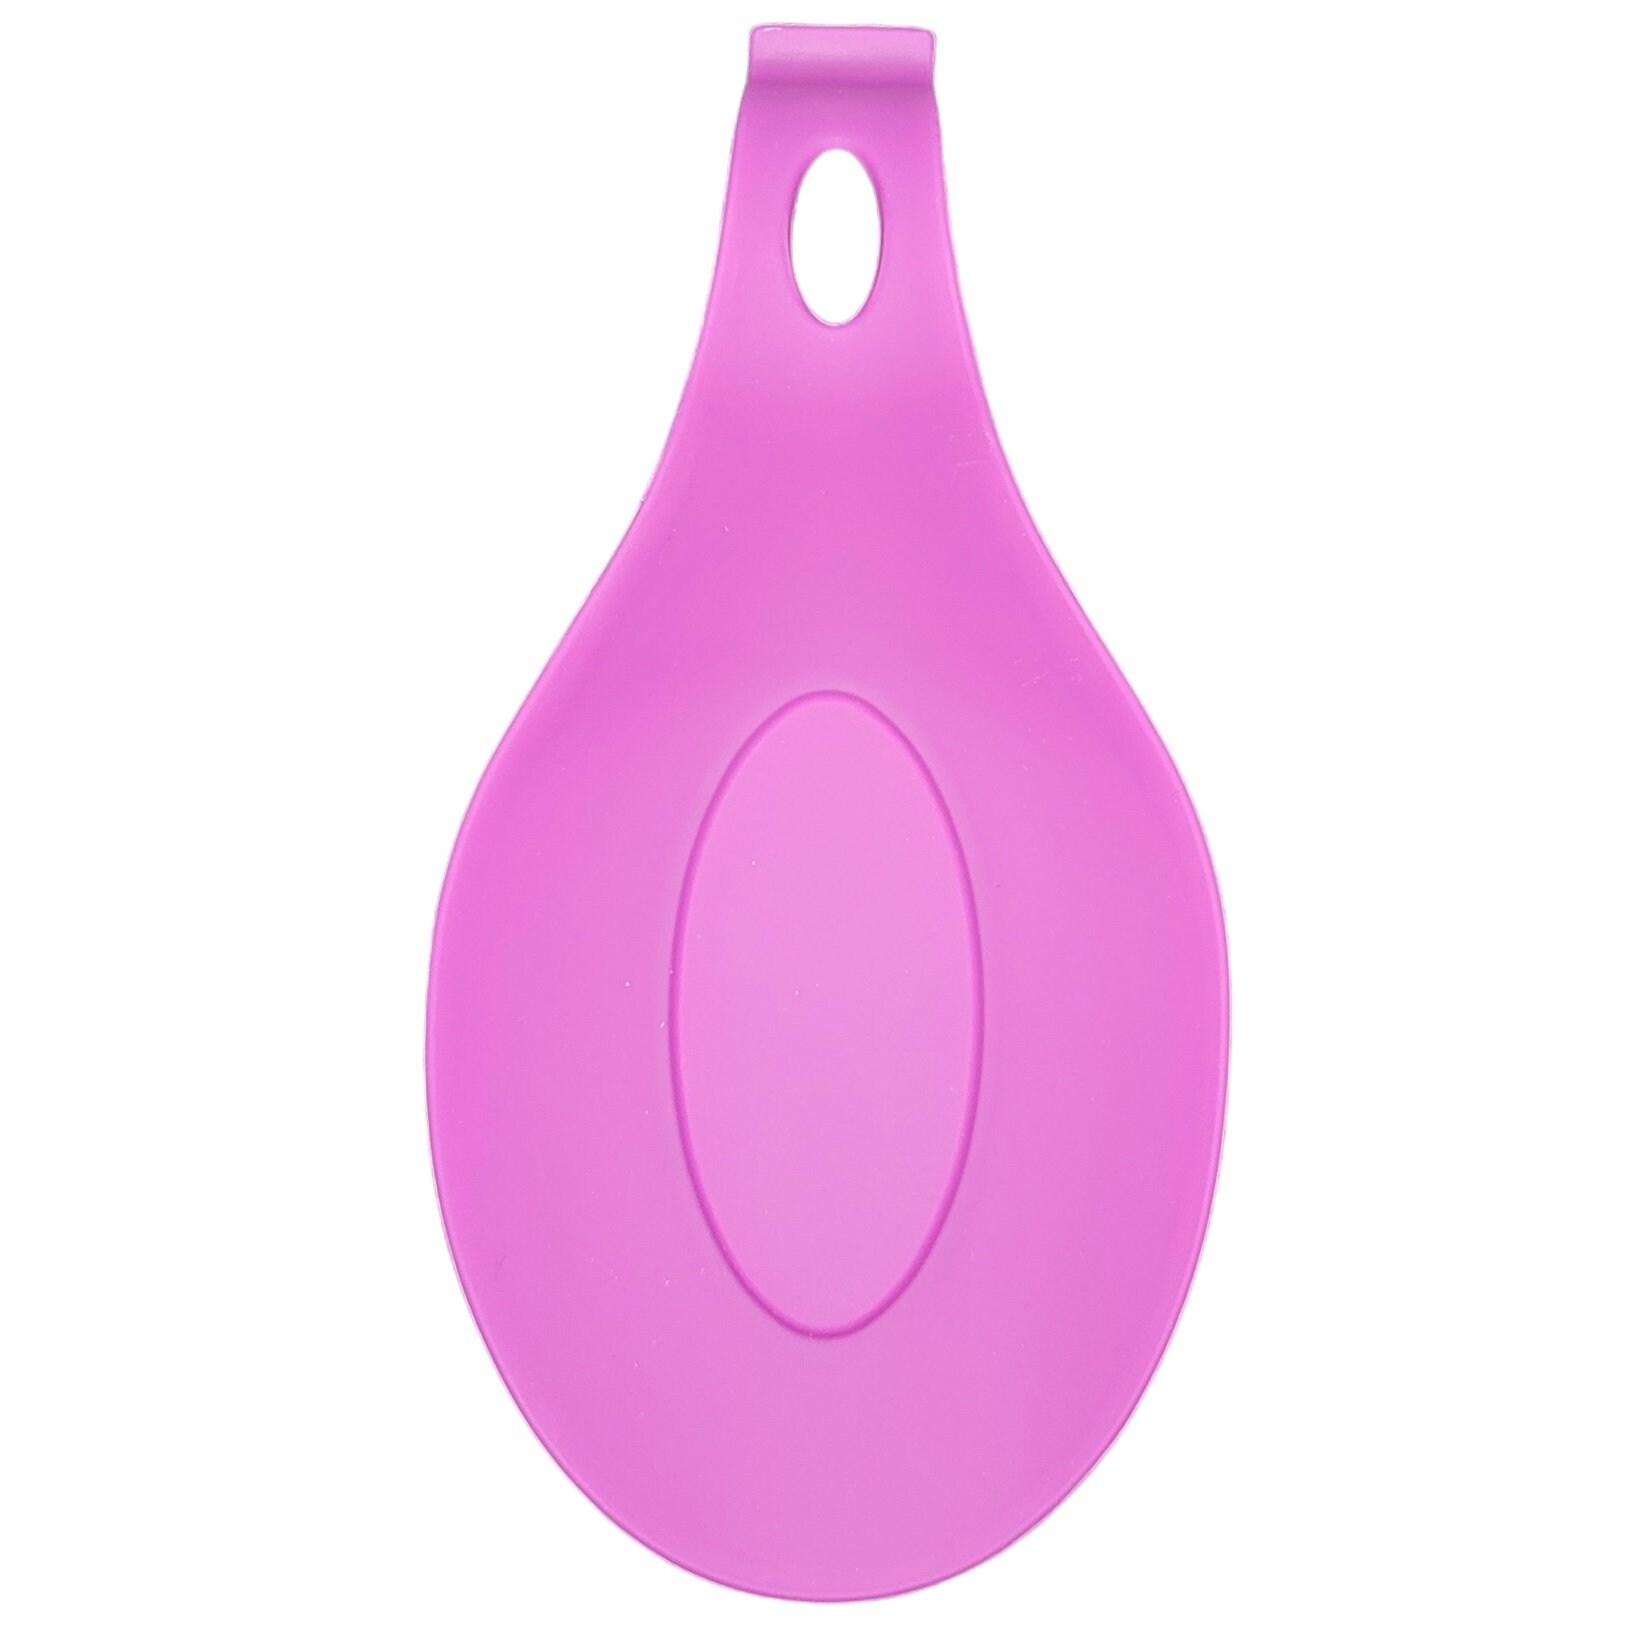 https://ak1.ostkcdn.com/images/products/is/images/direct/43e5b3599d5ef0142c455fa2355606d9d00b4a33/Handy-Housewares-Jumbo-Flexible-Silicone-Spoon-Rest%2C-Heat-Resistant-Stove-Top-Kitchen-Utensil-Drip-Pad.jpg